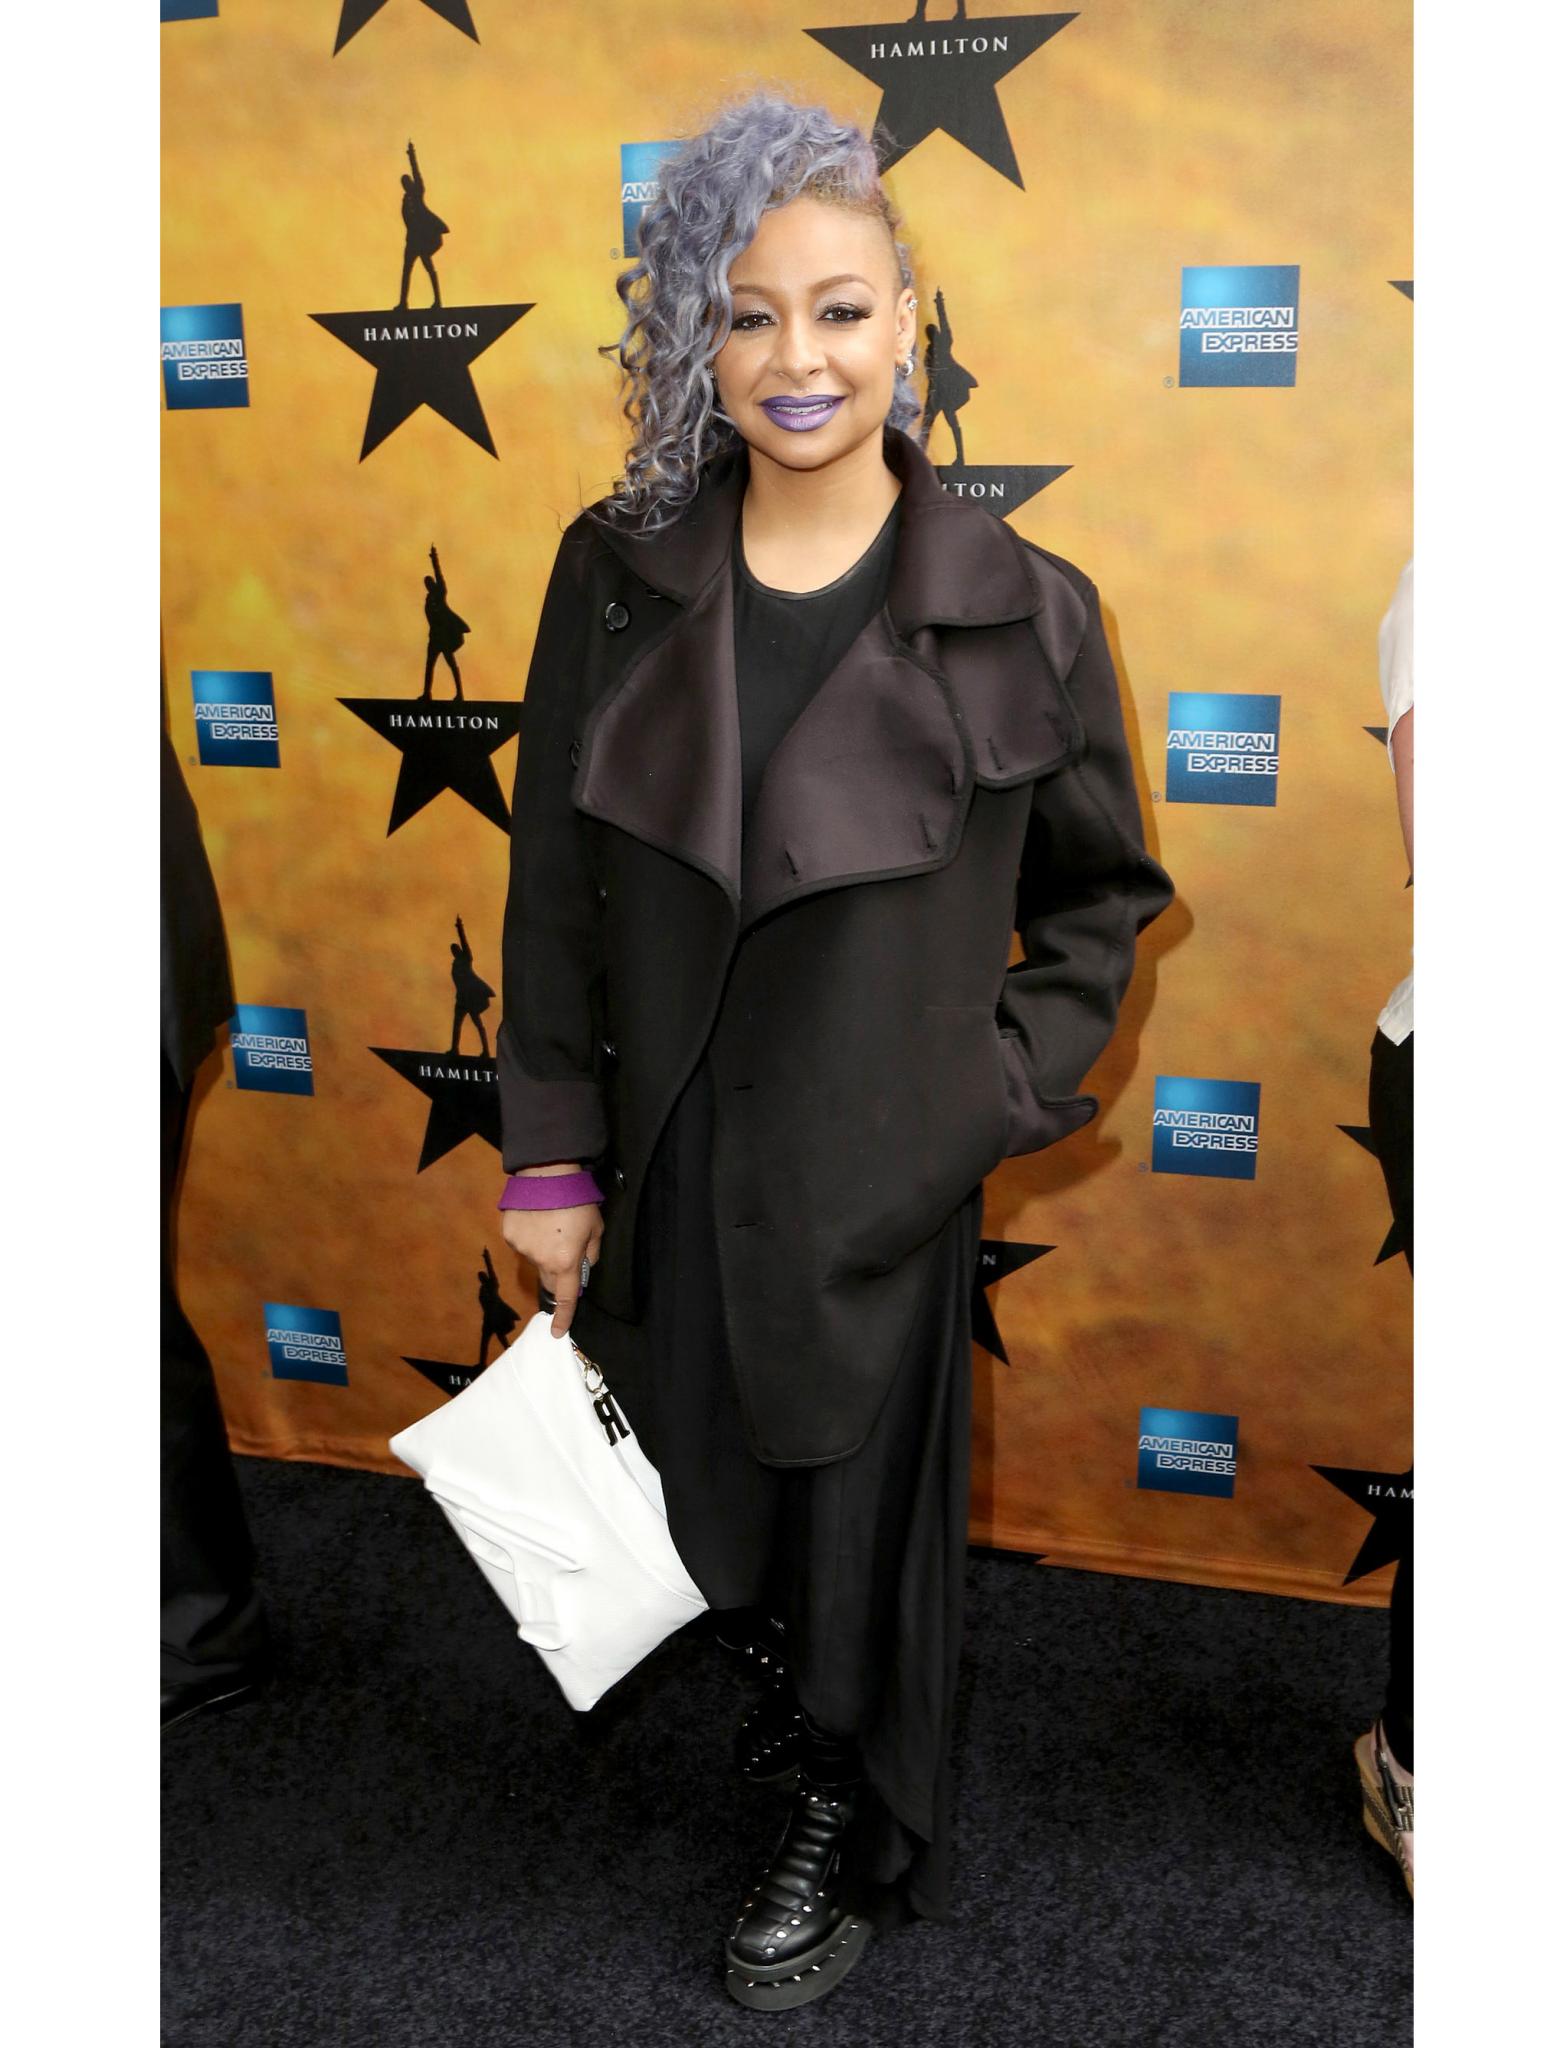 Raven-Symoné's Father Defends His Daughter 'Even If She Says Some Dumb S--t'